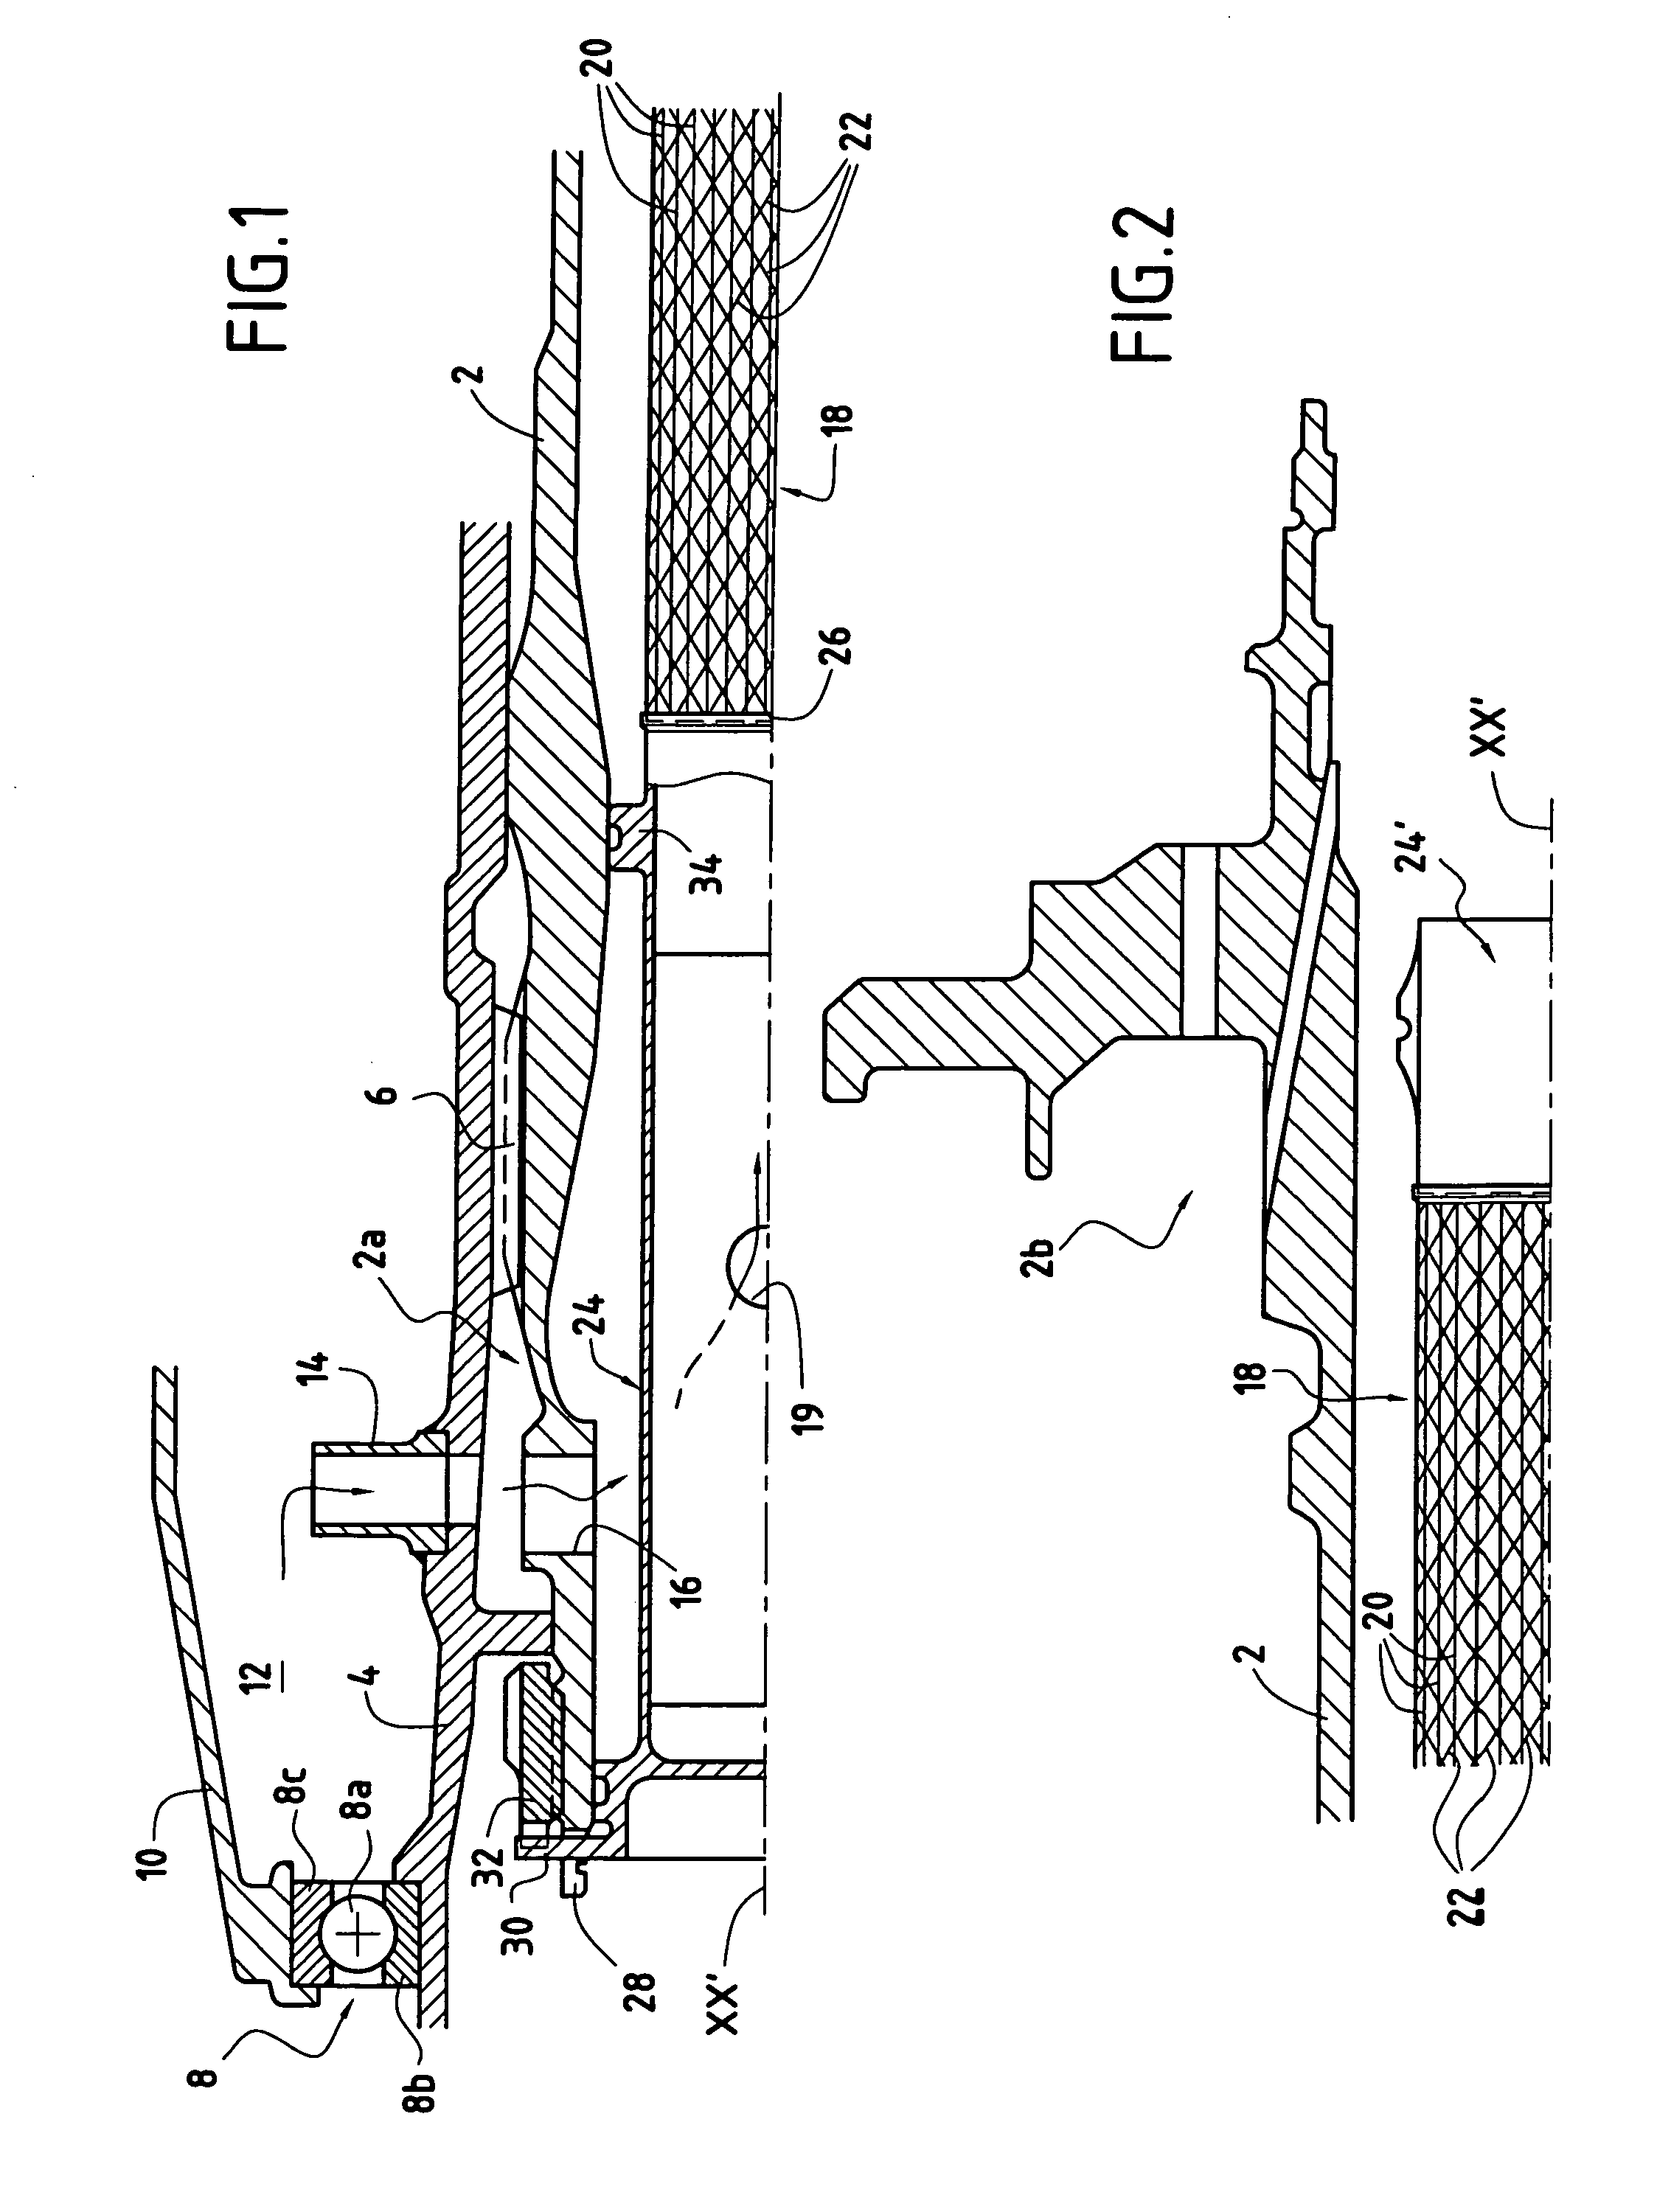 Drain tube for a low-pressure shaft of a turbomachine